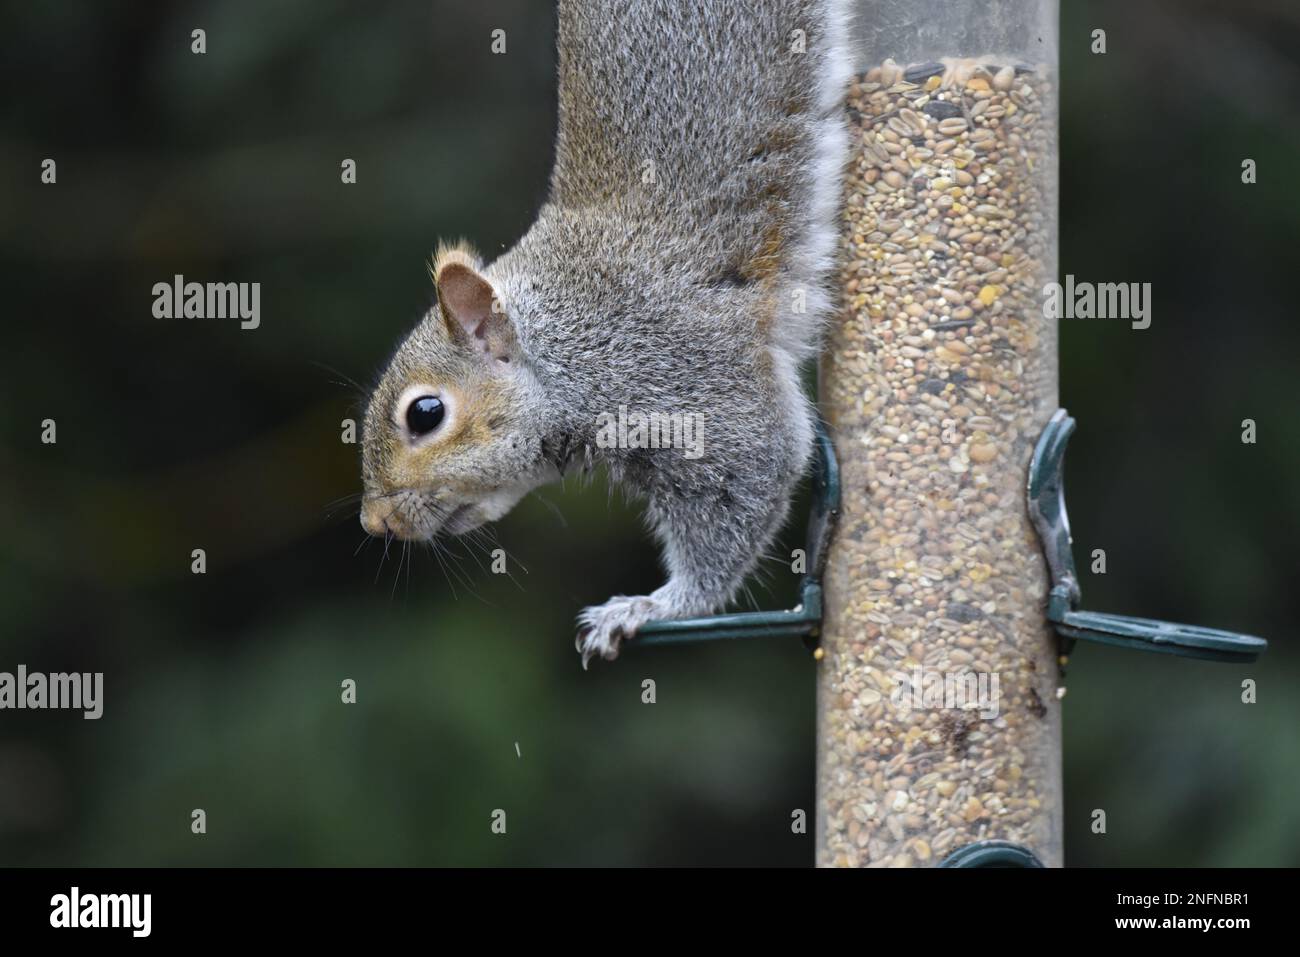 Close-Up Image of Head and Feet of a Grey Squirrel (Sciurus carolinensis) in Left-Profile, with Feet on the Pegs of a Bird Seed Feeder in the UK Stock Photo